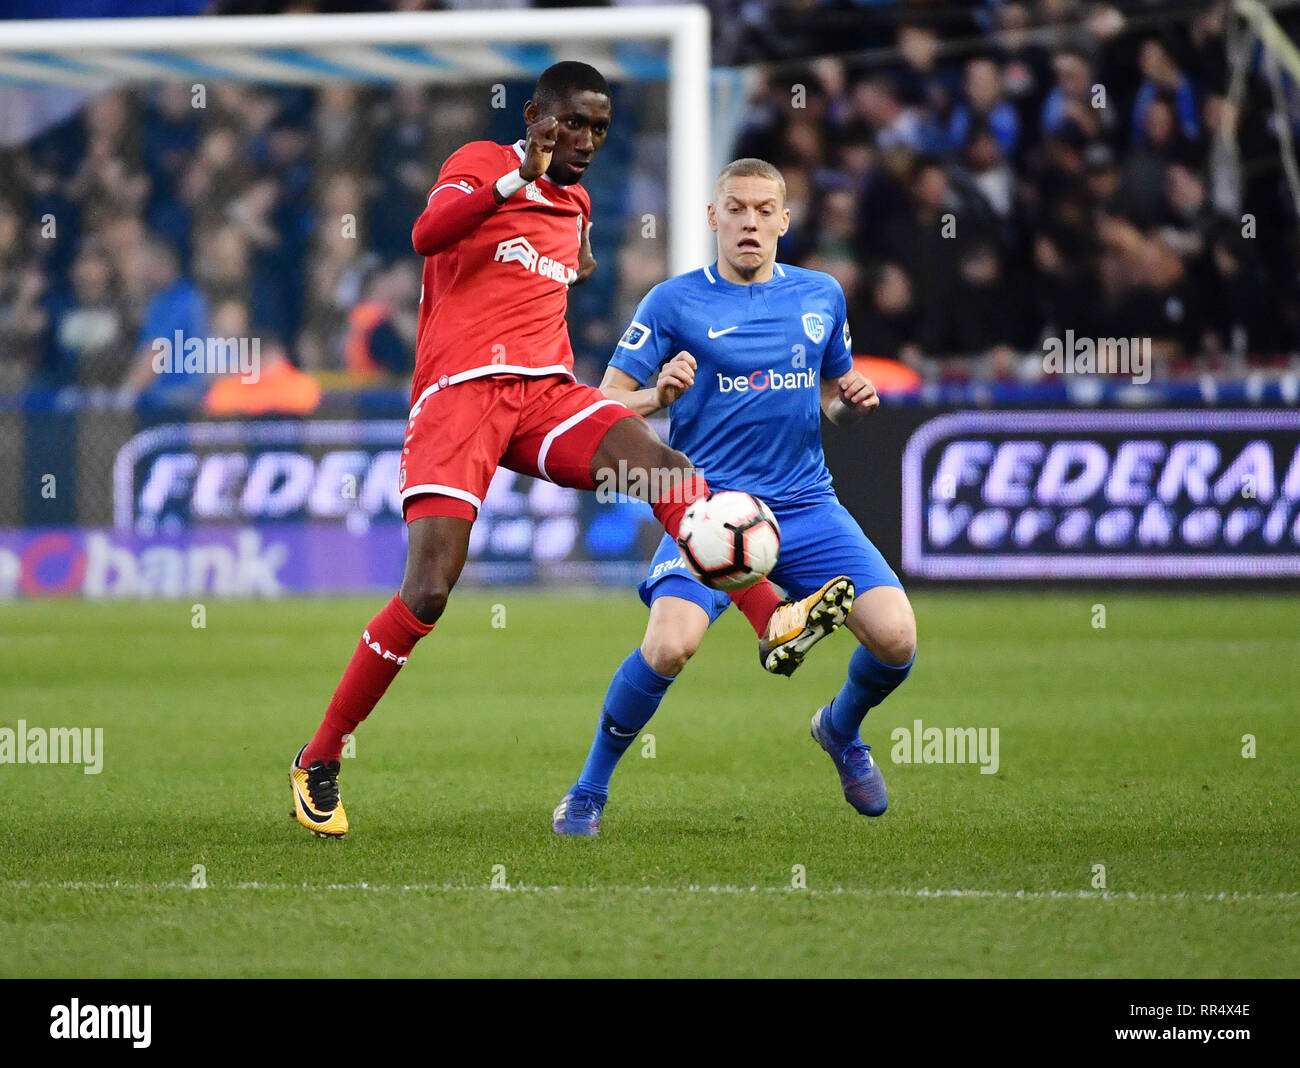 Genk Belgium February 24 William Owusu Of Antwerp And Casper De Norre Of Genk Fight For The Ball During The Jupiler Pro League Match Day 27 Between Krc Genk And Royal